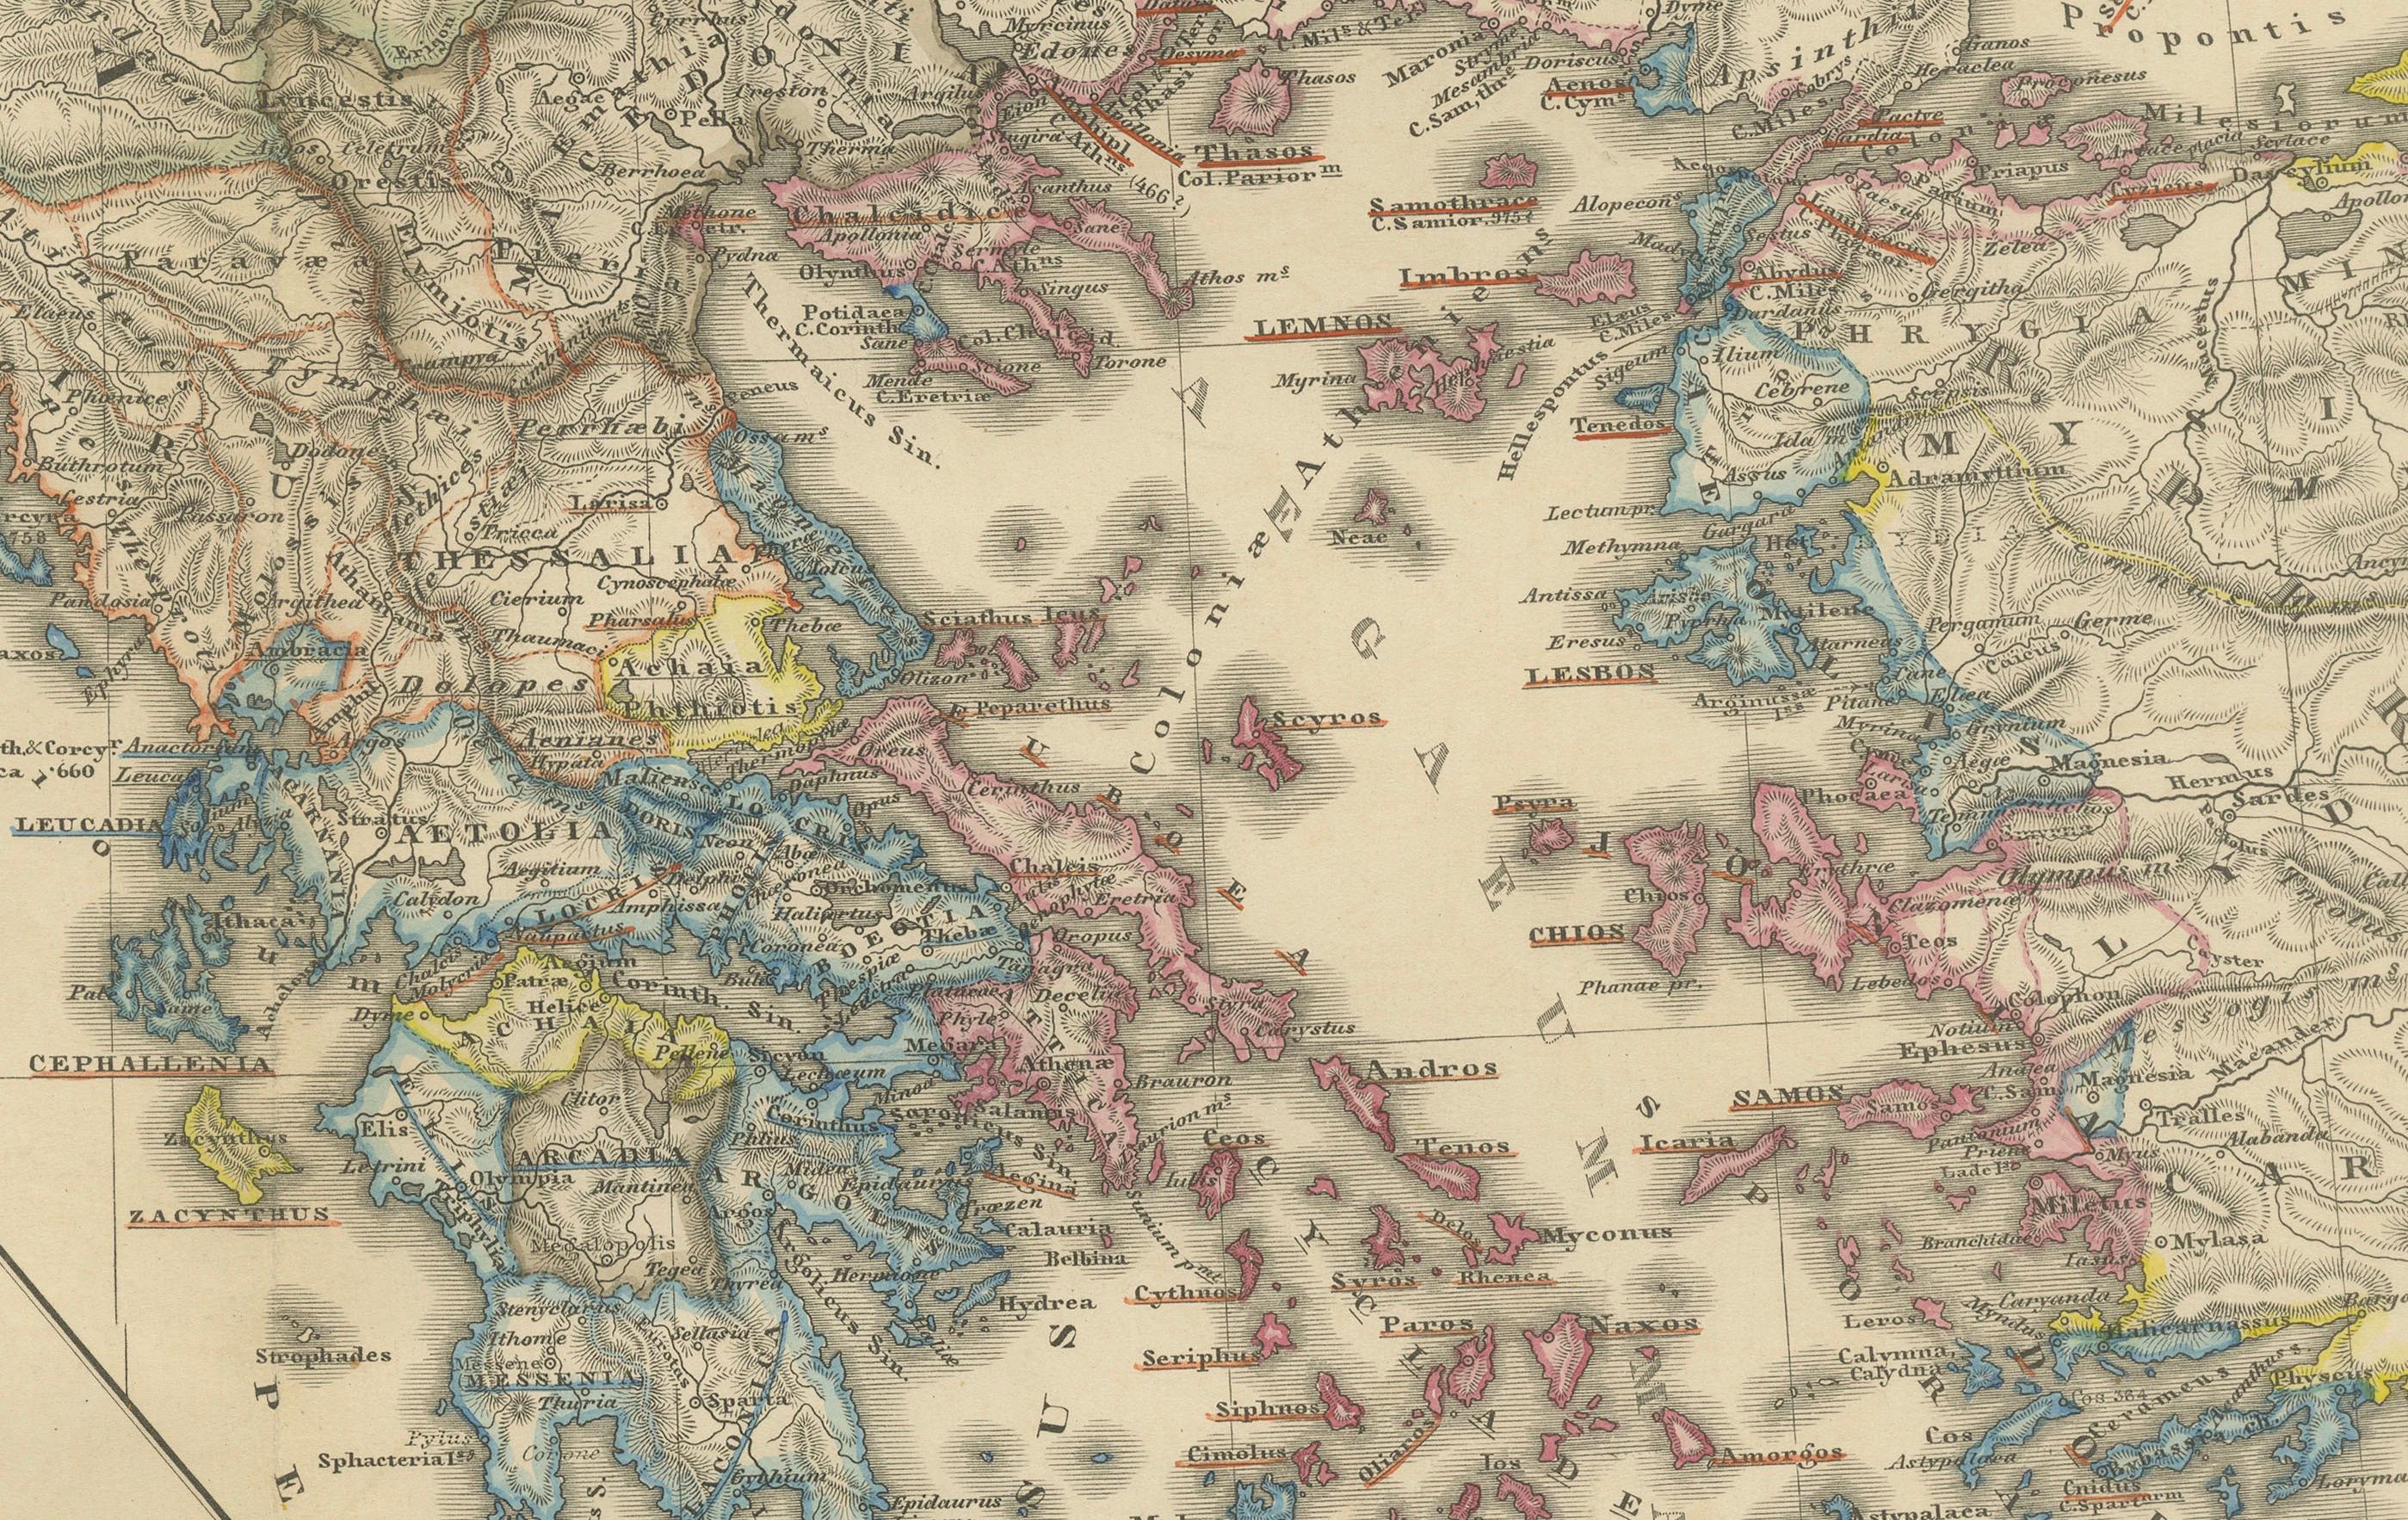 Late 19th Century Map of Greece, Macedonia, Thrace from the time of the Peloponnesian War, 1880